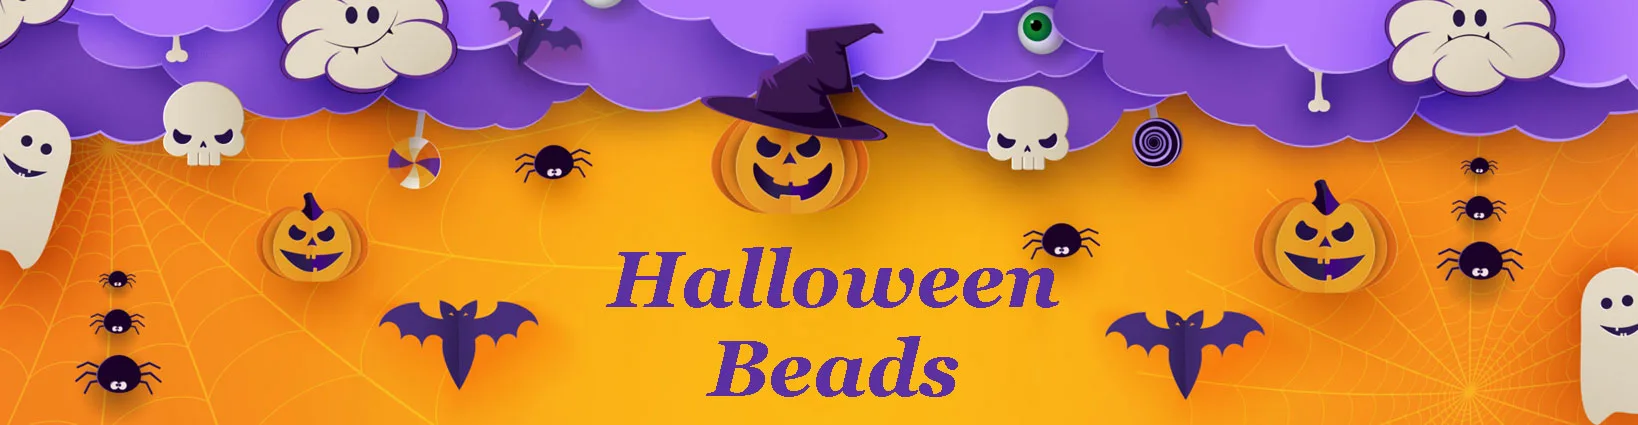 Halloween Beads and Crafts